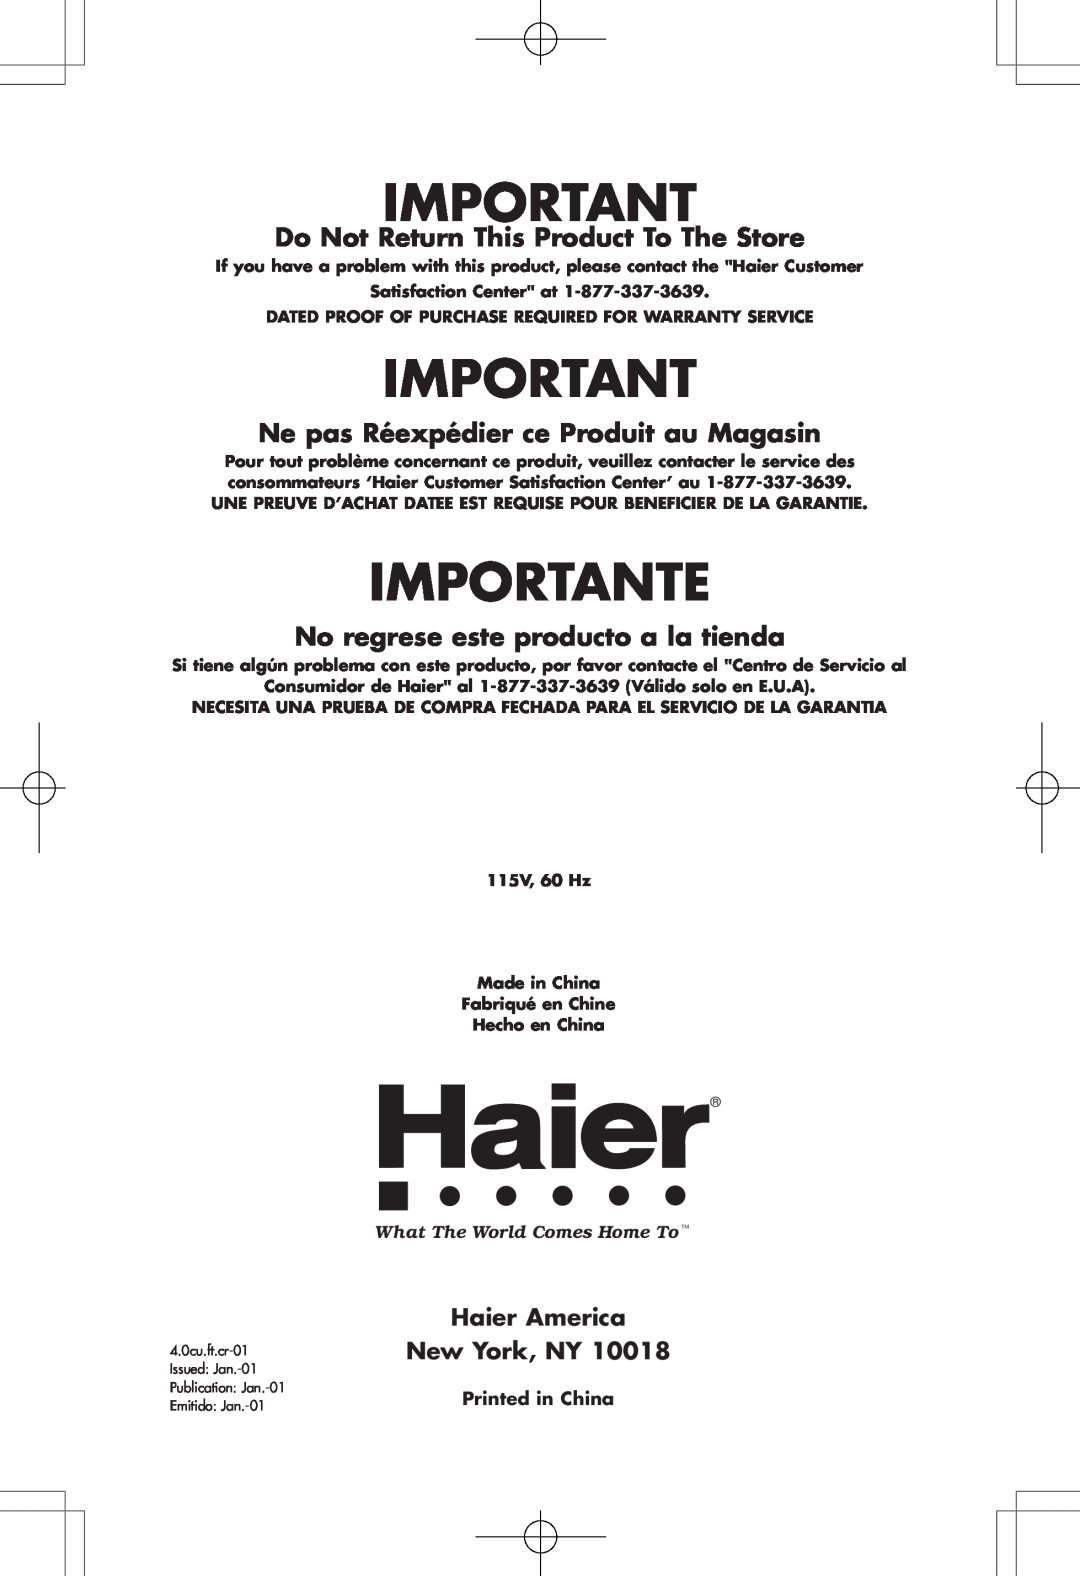 Haier HSE04WNA, HSP04WNA user manual Importante, Haier America, New York, NY, Do Not Return This Product To The Store 